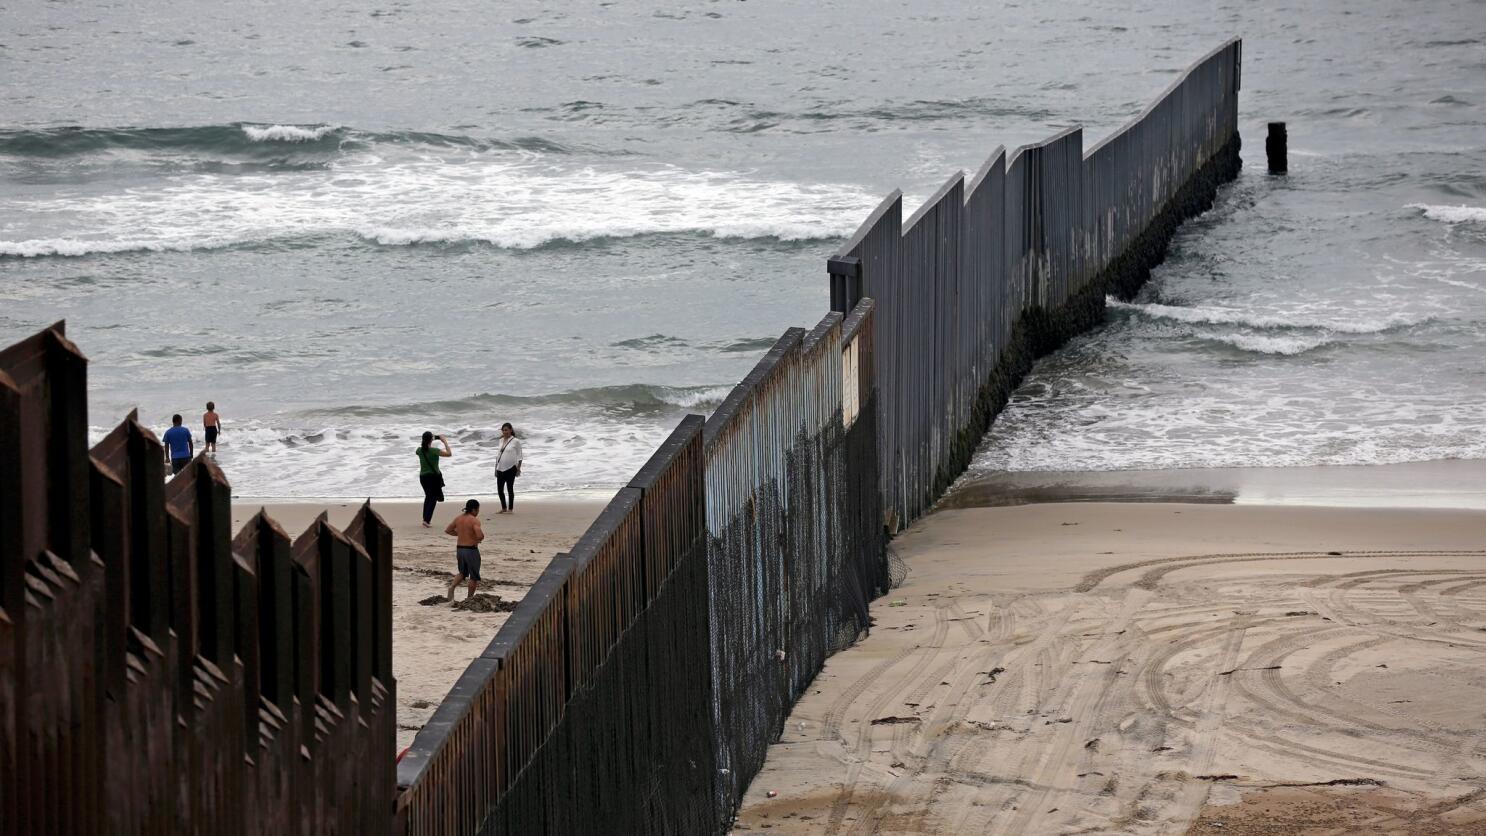 Where the border fence meets the sea, a strange beach scene contrasting the  U.S. and Mexico - Los Angeles Times